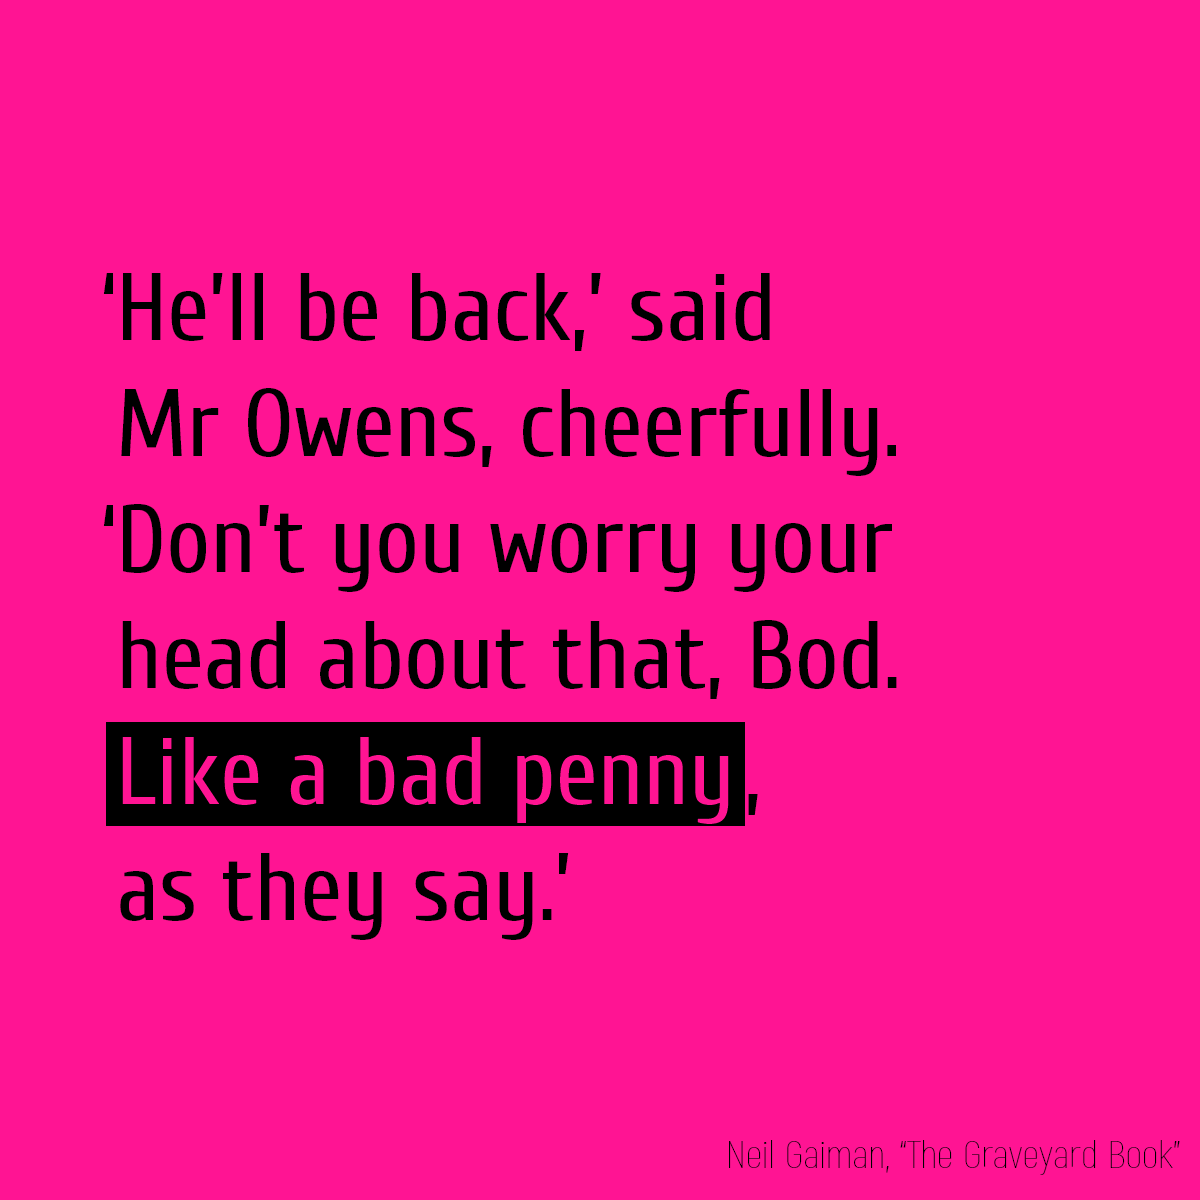 ‘He’ll be back,’ said Mr Owens, cheerfully. ‘Don’t you worry your head about that, Bod. **Like a bad penny**, as they say.’